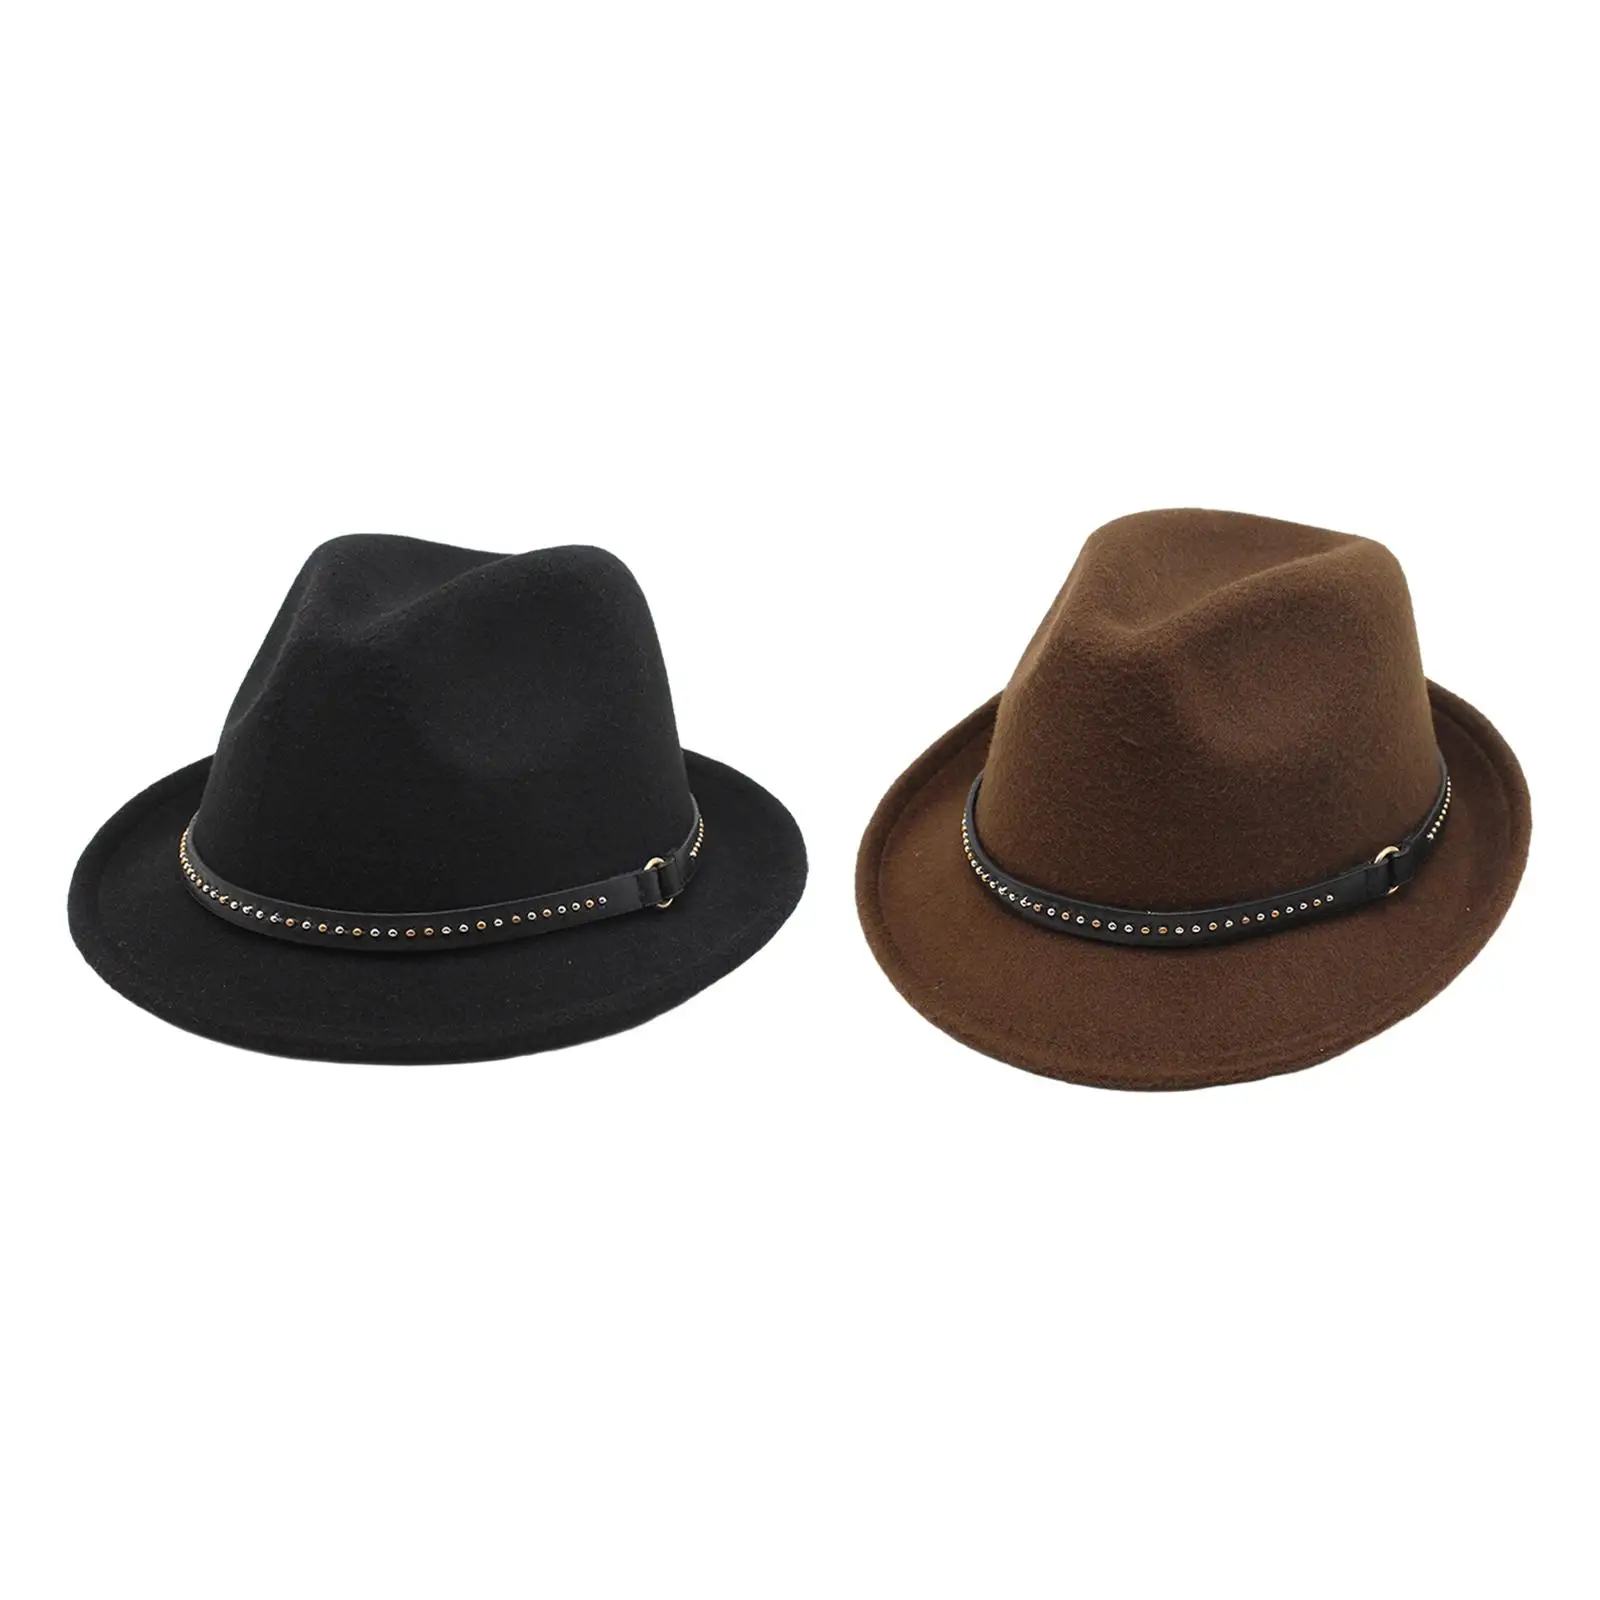 Fedora Hat Cosplay Western Cowboy Hat Decorated Classic Short Brim for Fancy Dress Cocktail Party Stage Performance Outdoor